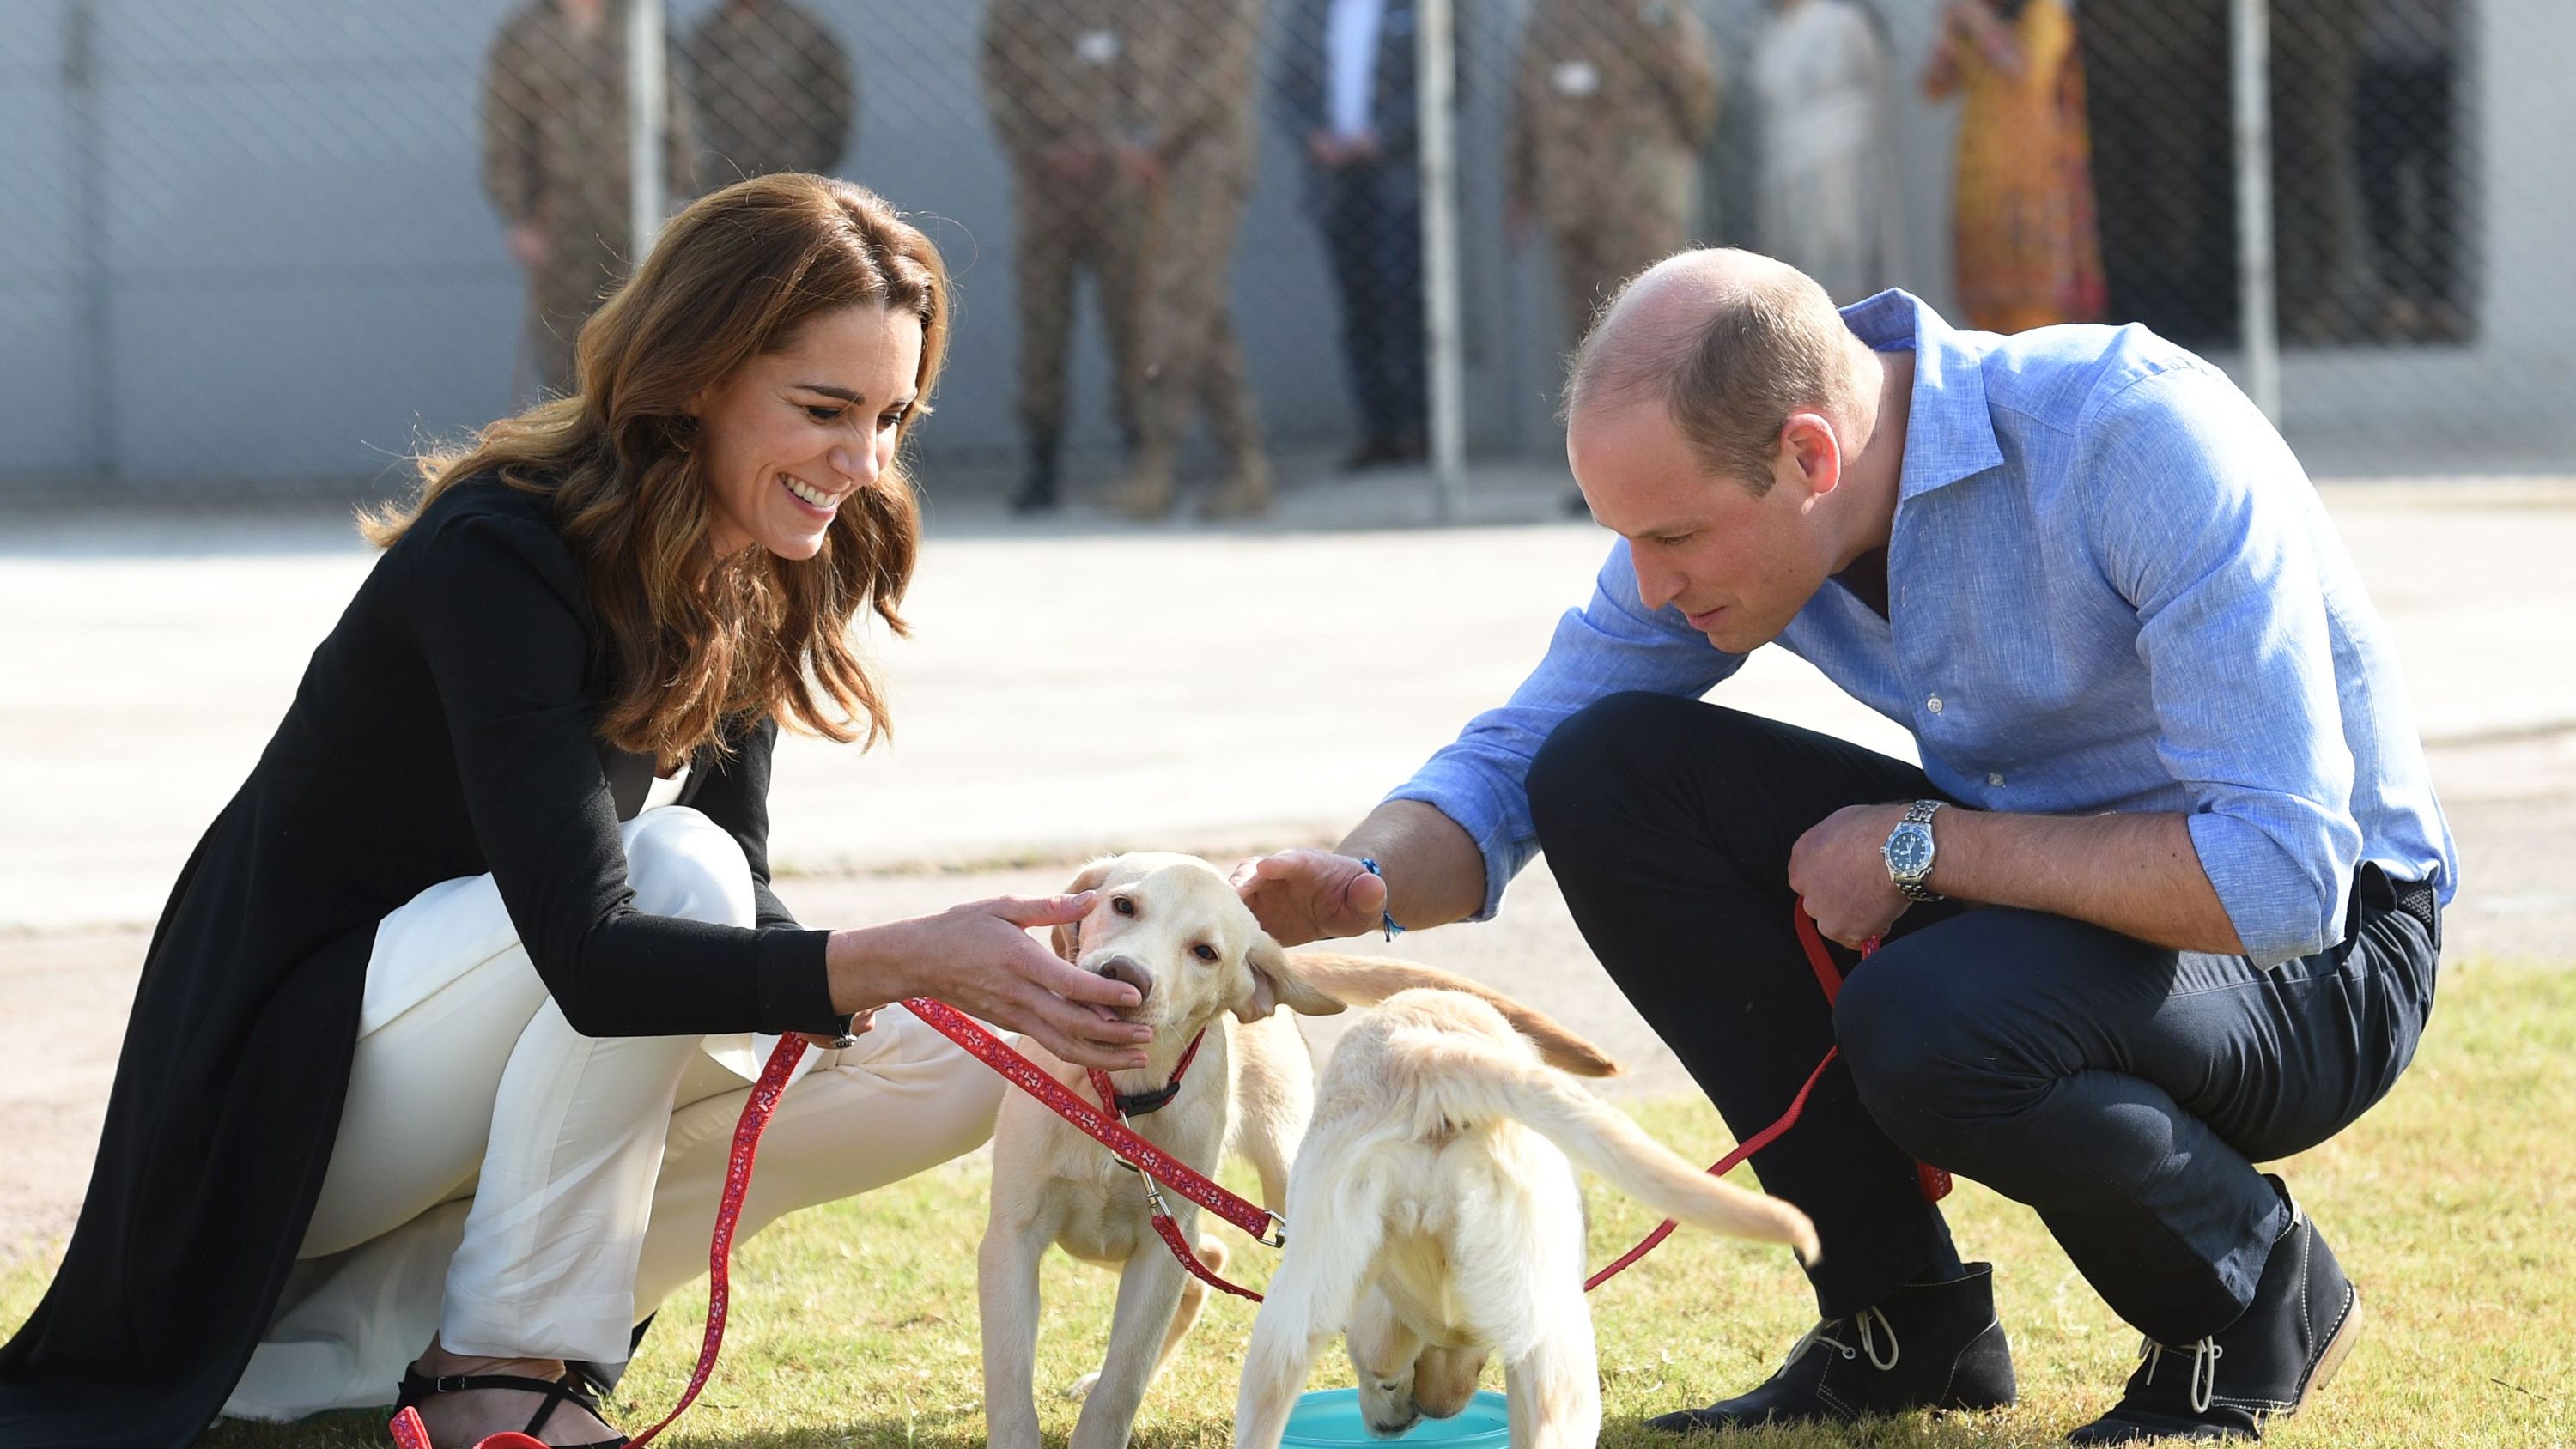 Kate Middleton and Prince William Got a New Puppy for Their Family